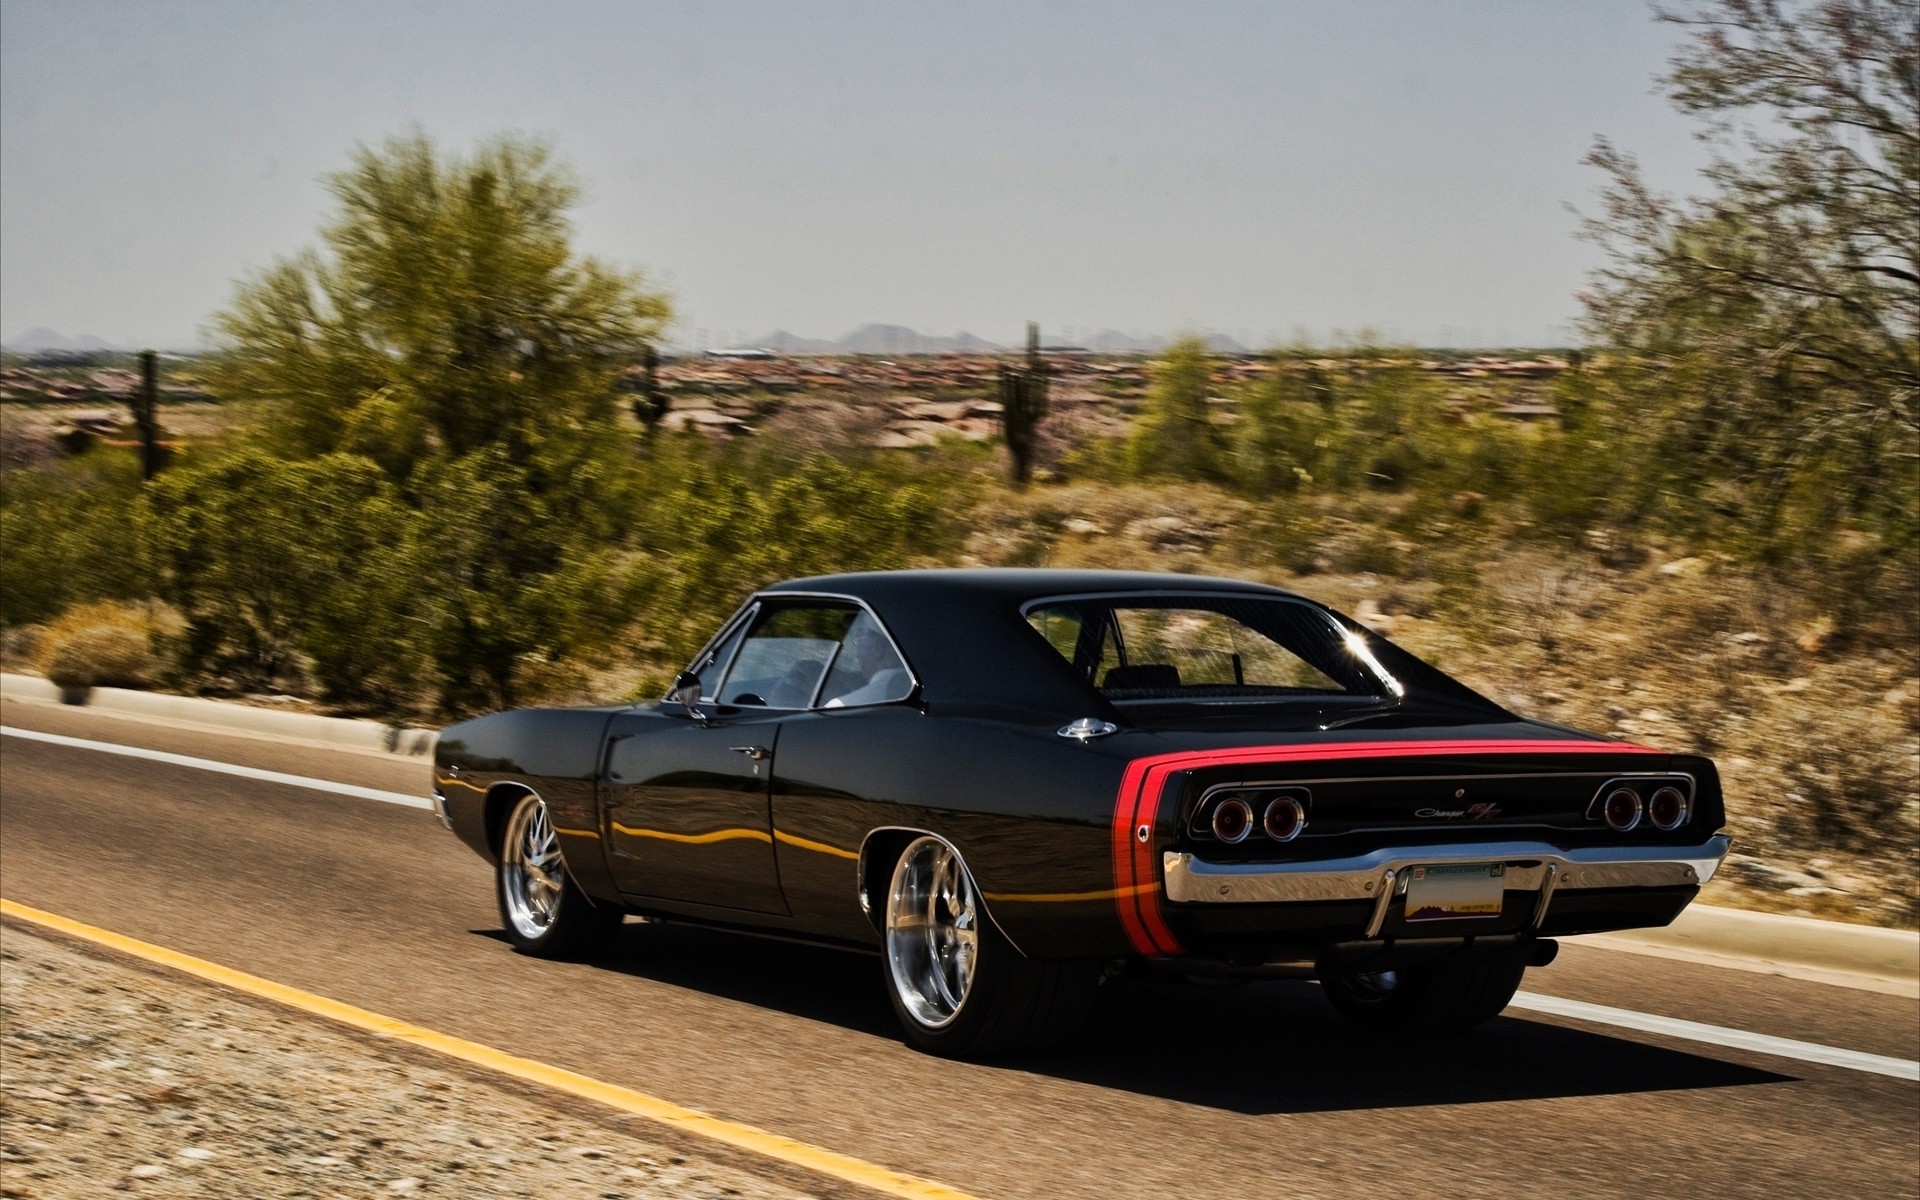 69 Dodge Charger Wallpaper ①